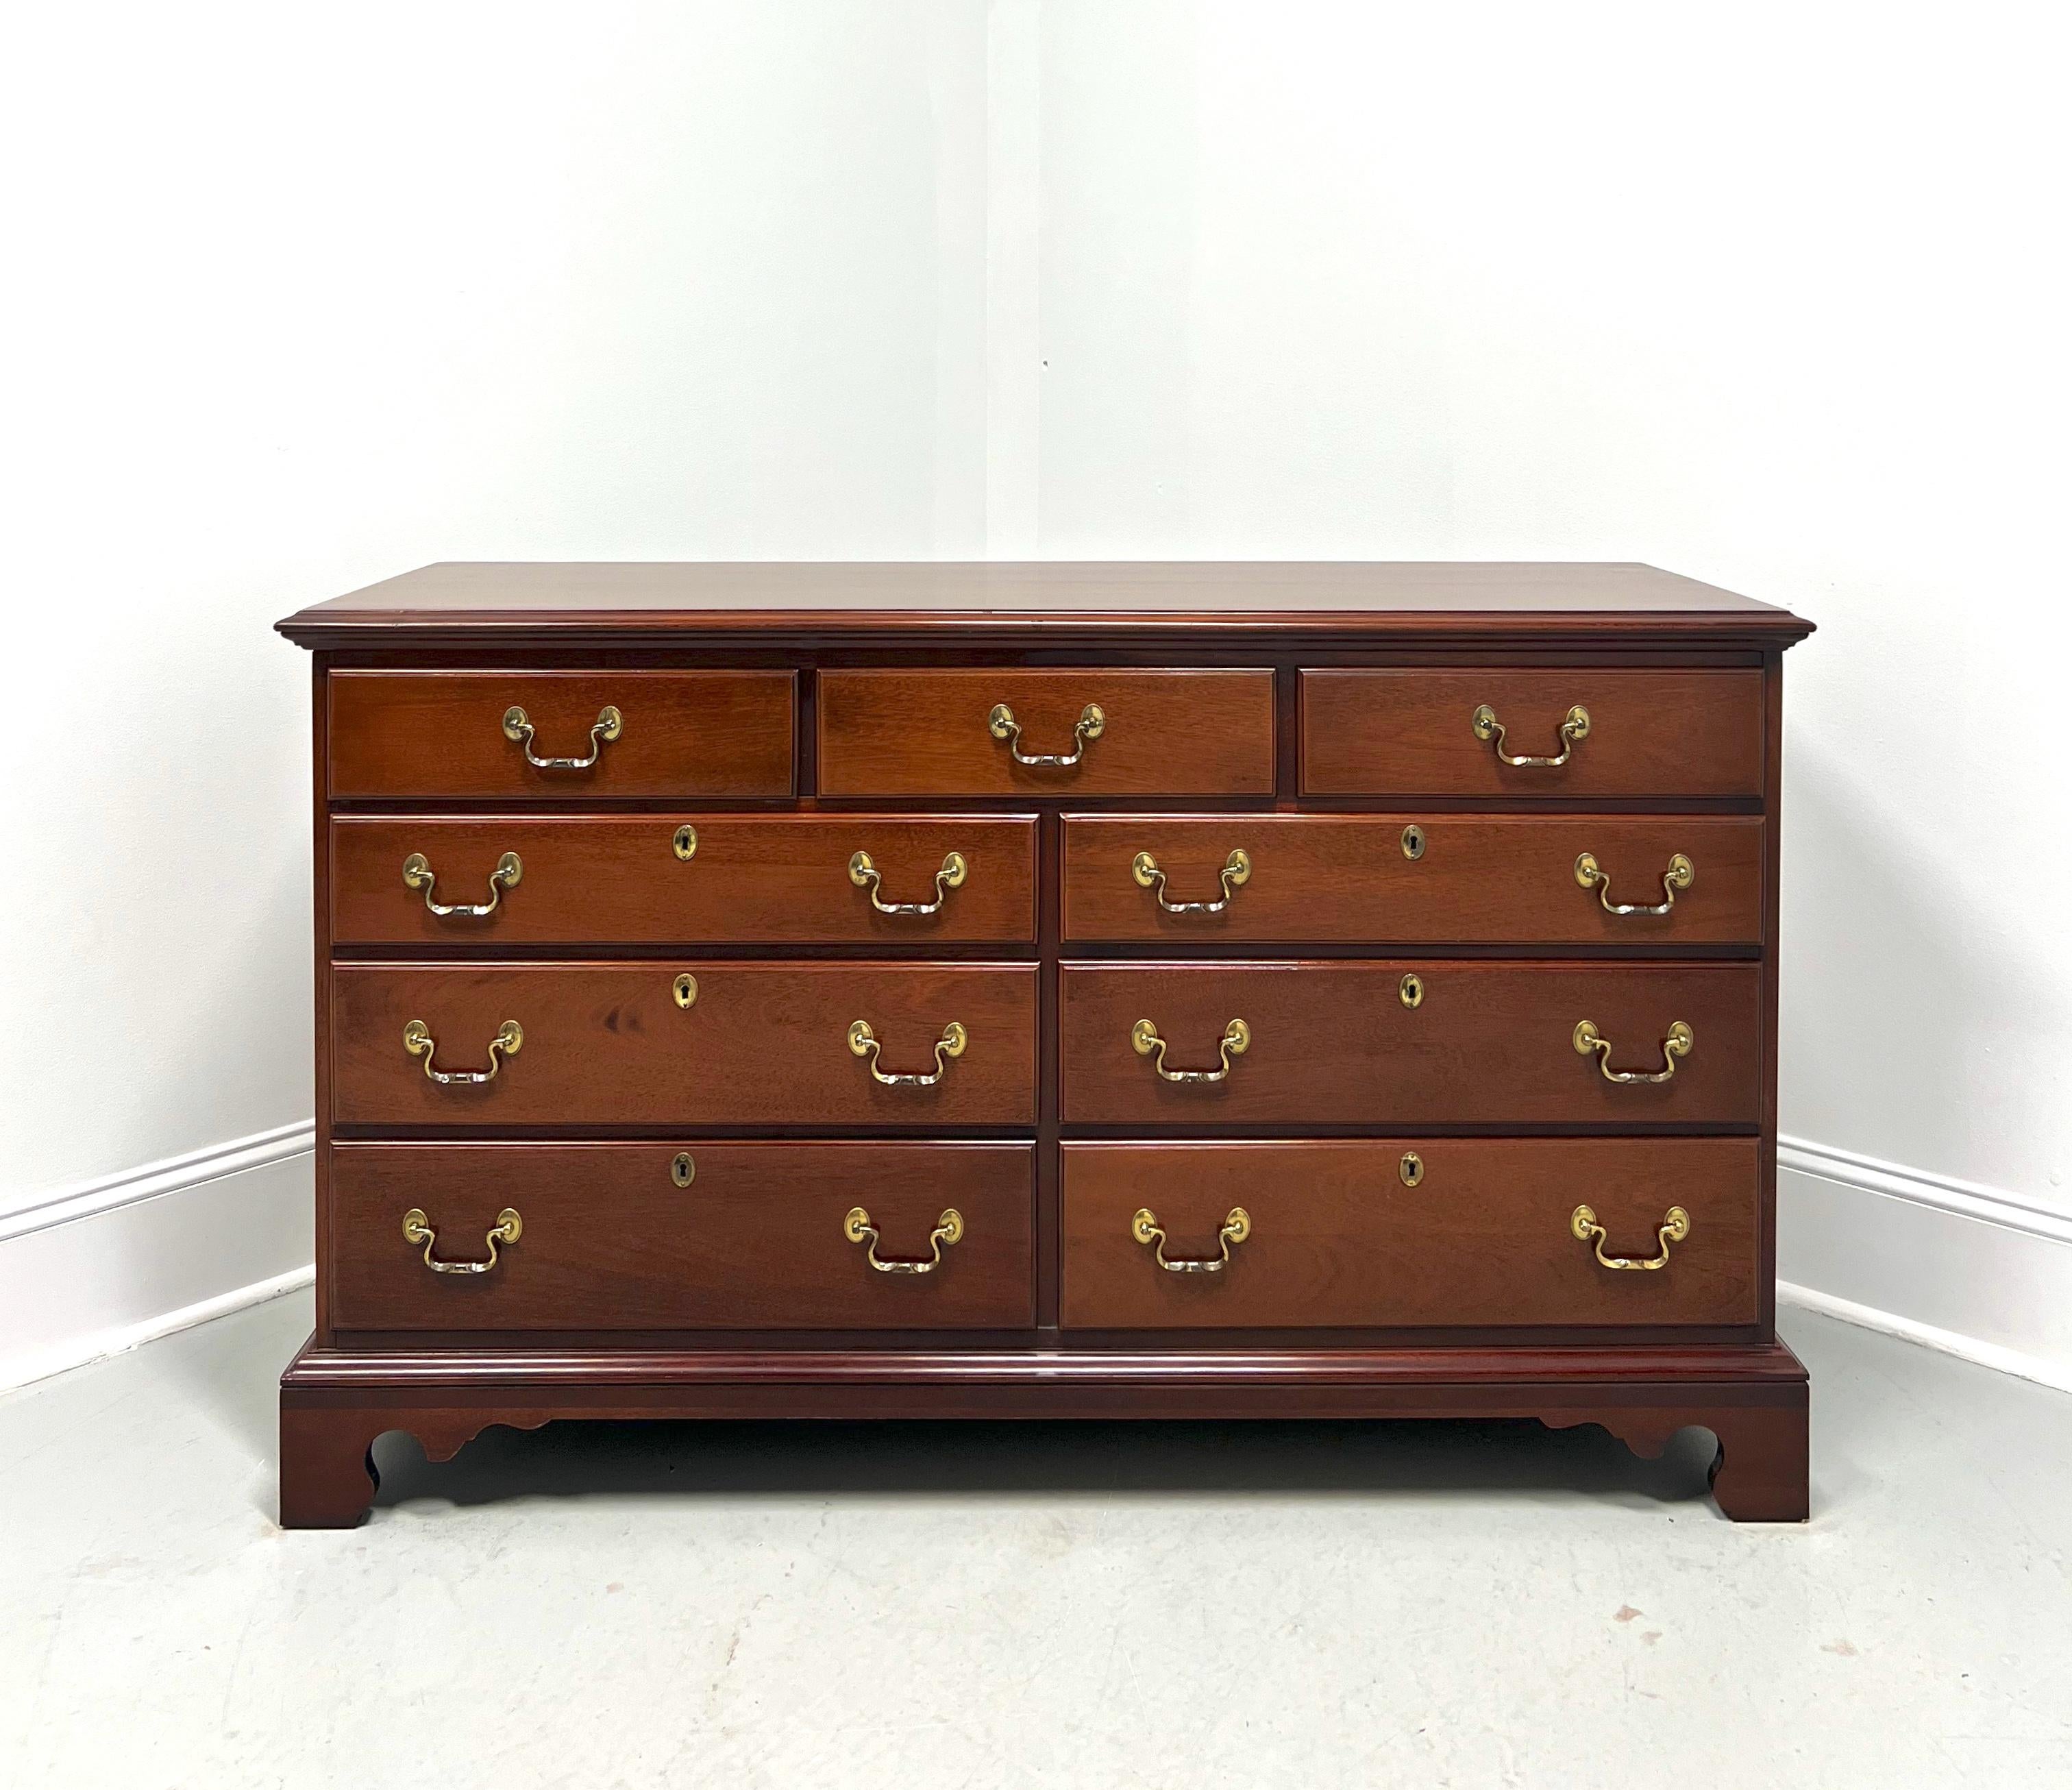 A Chippendale style double dresser by Link-Taylor, from their Heirloom Gallery, the Low Country. Solid mahogany with brass hardware, bevel edge to the top, and bracket feet. Features nine drawers of dovetail construction, six with faux keyhole